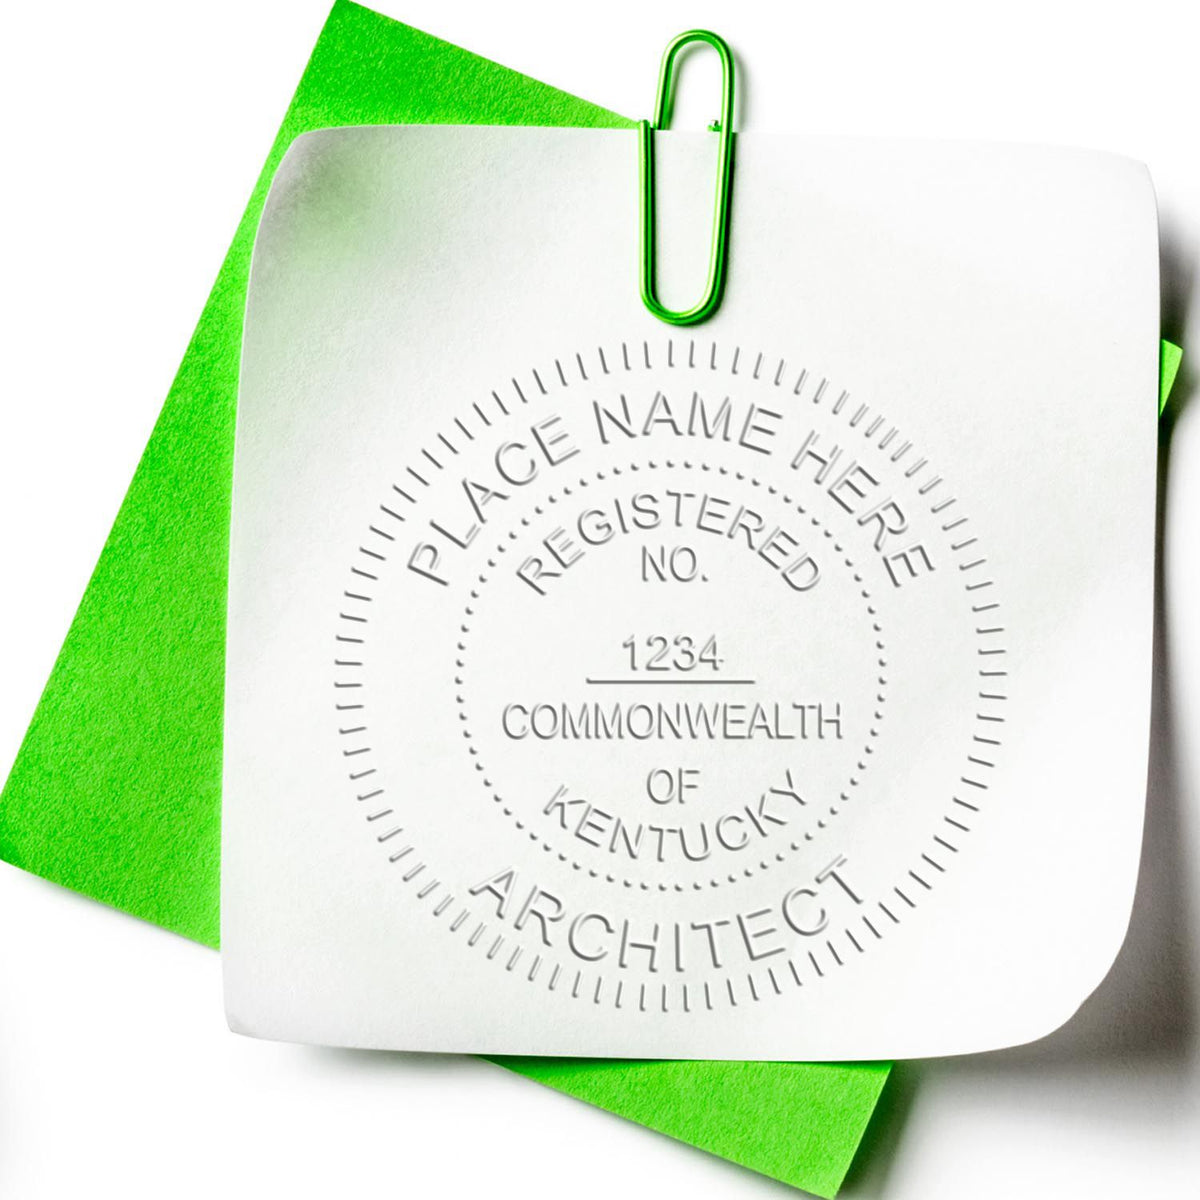 The Gift Kentucky Architect Seal stamp impression comes to life with a crisp, detailed image stamped on paper - showcasing true professional quality.